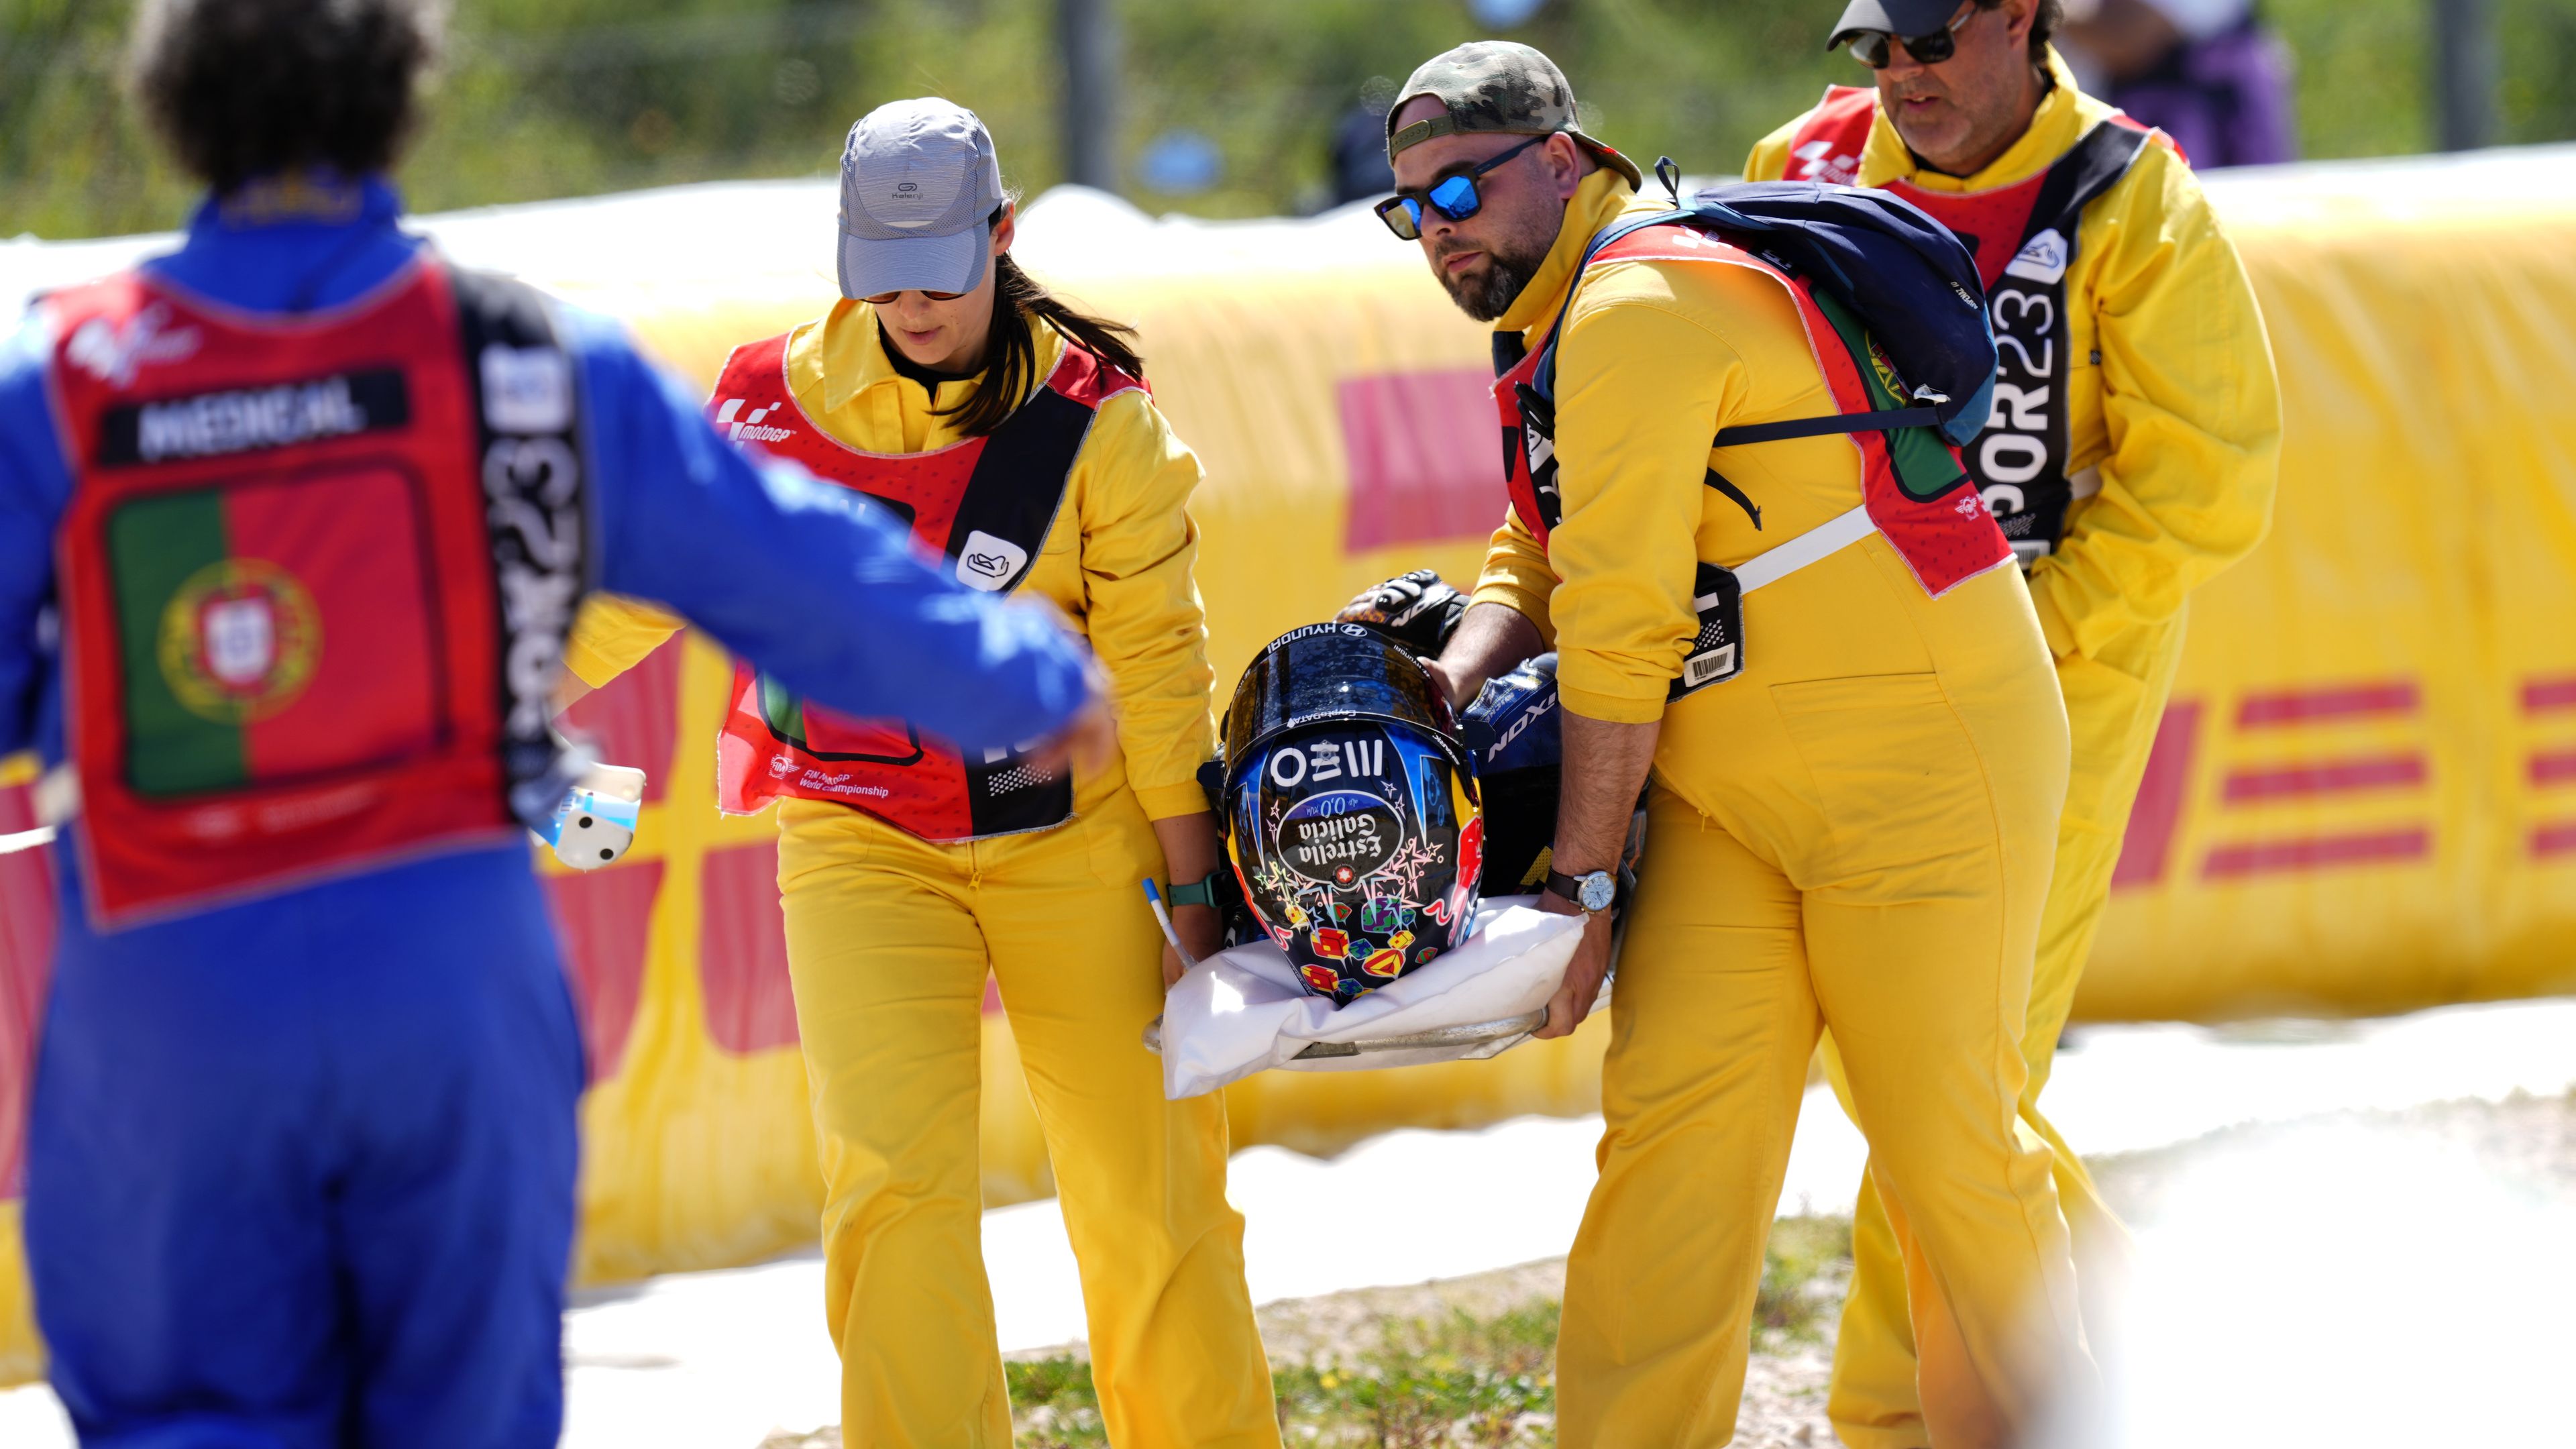 Four MotoGP riders ruled out of Argentine Grand Prix after Marc Marquez crash adds to carnage